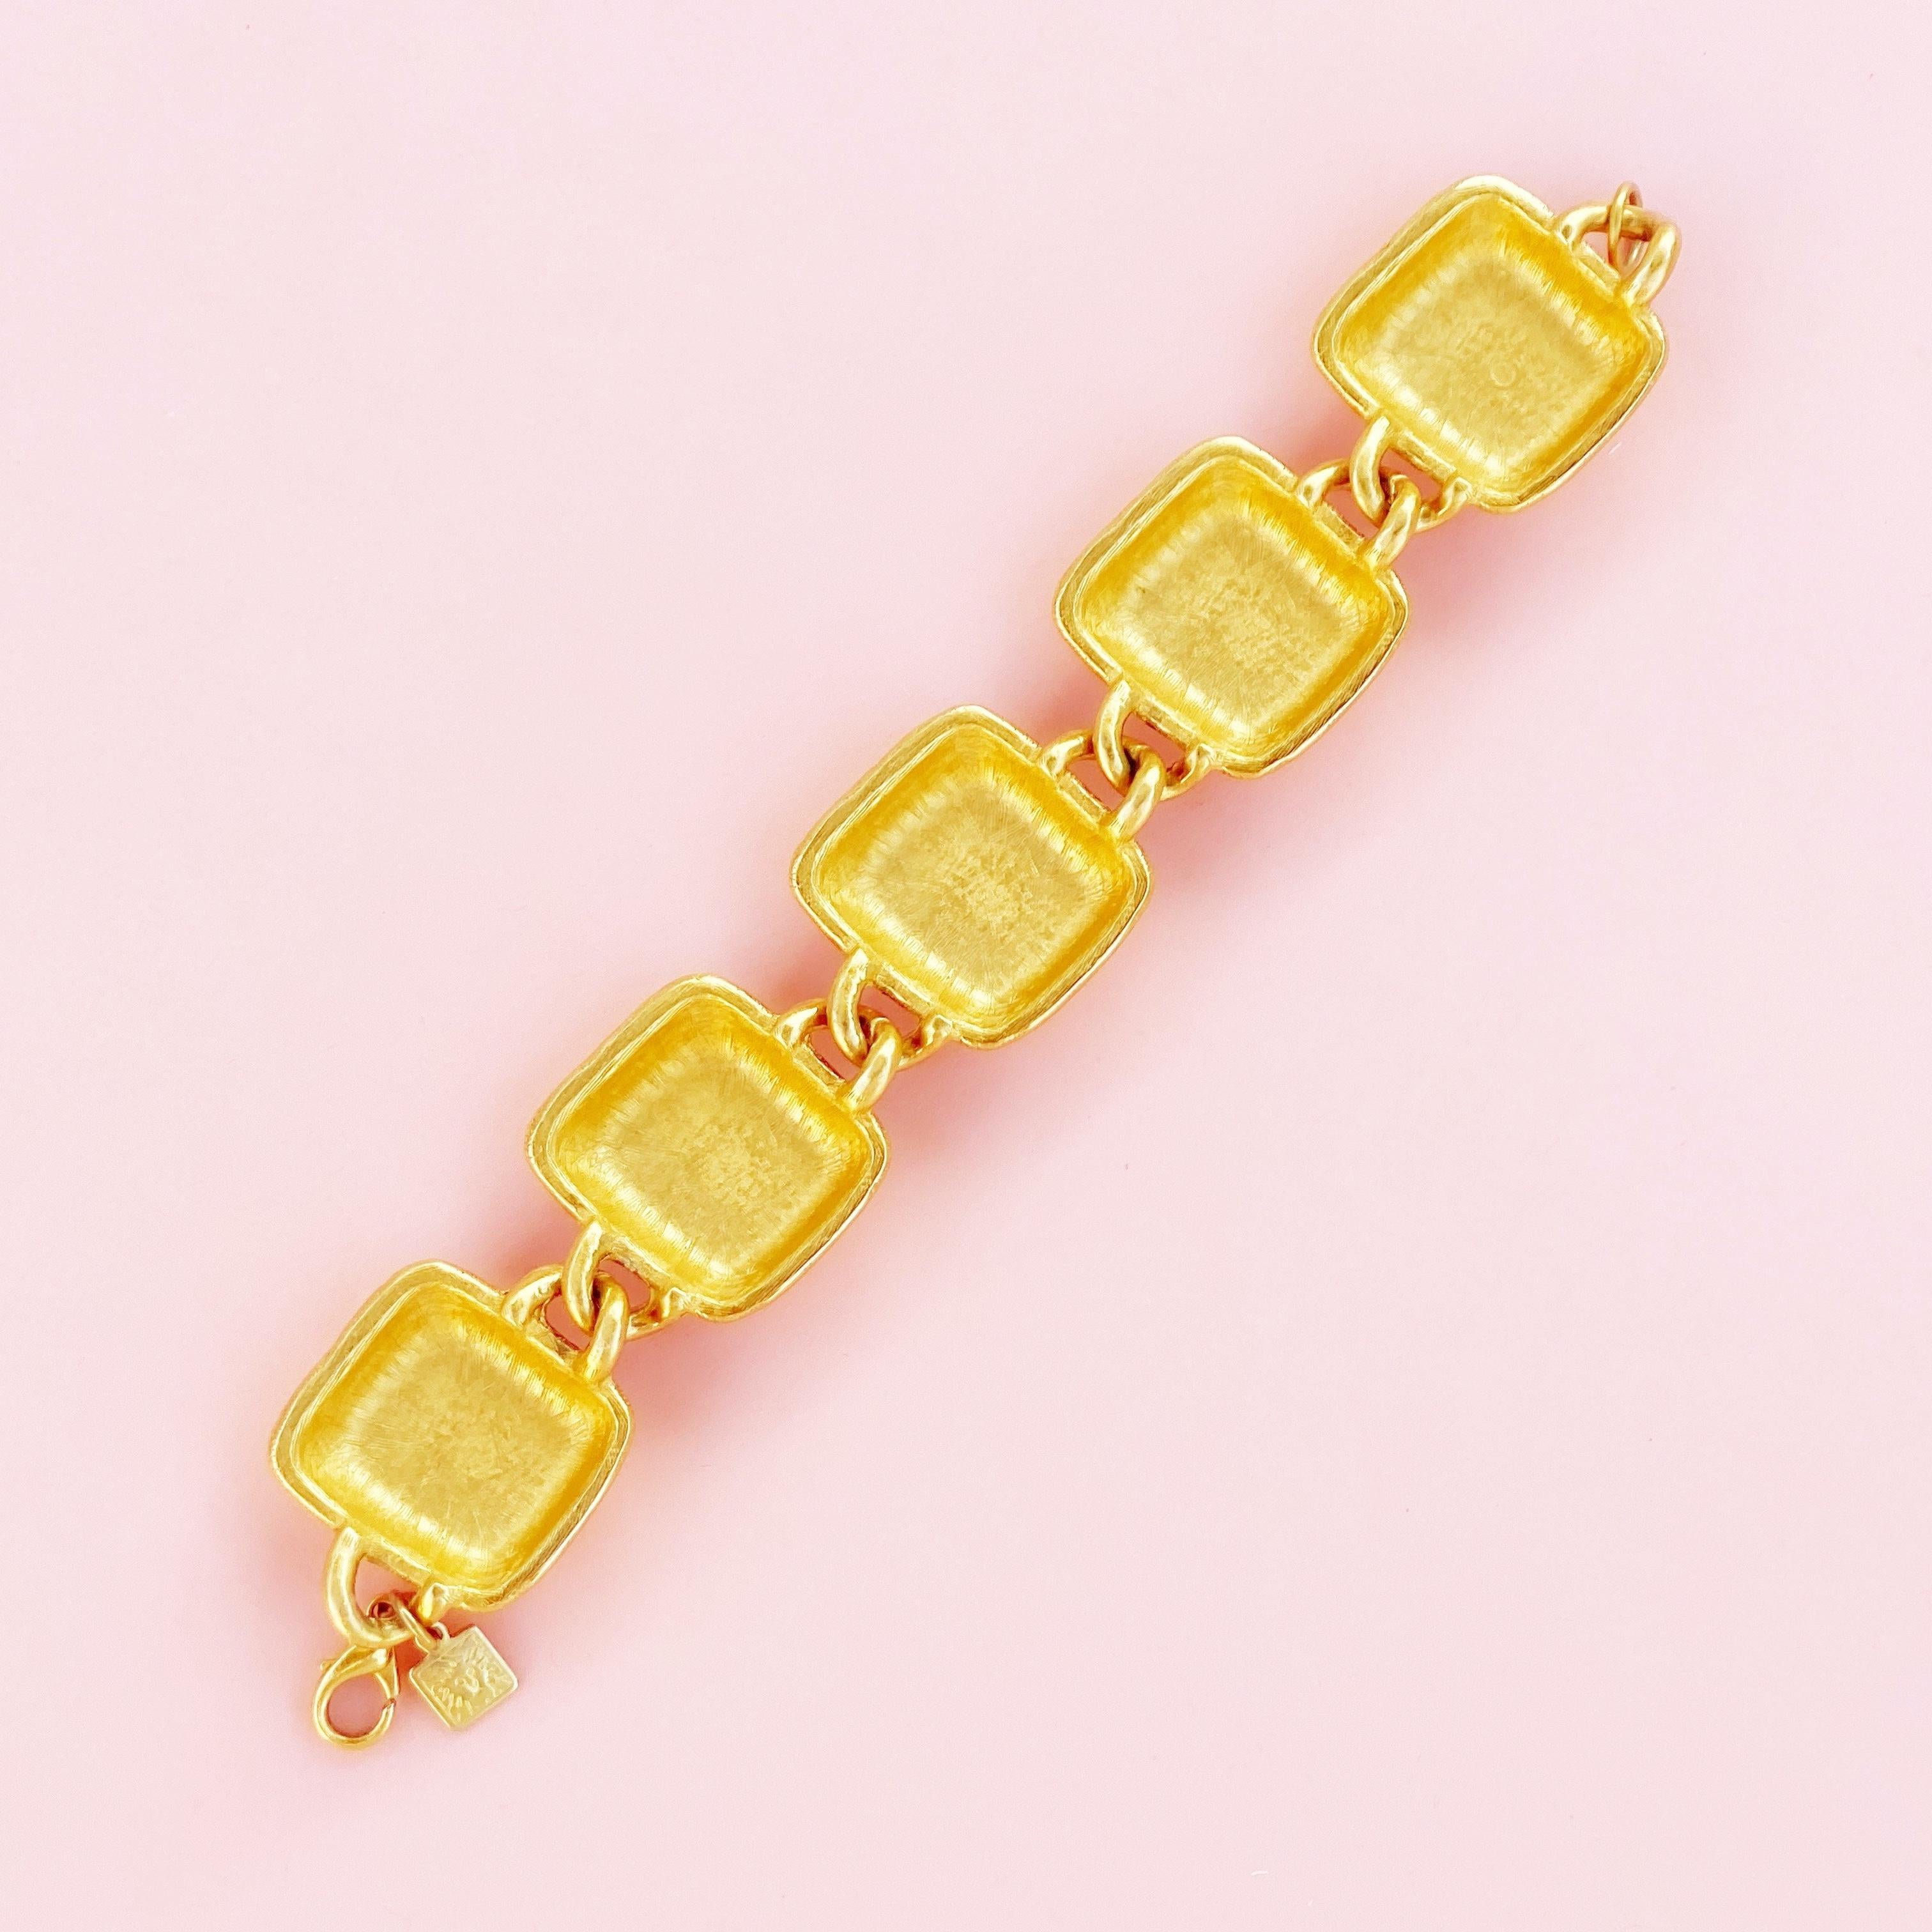 Women's Gilded Puffy Square Link Bracelet with Black Enameling By Anne Klein, 1980s